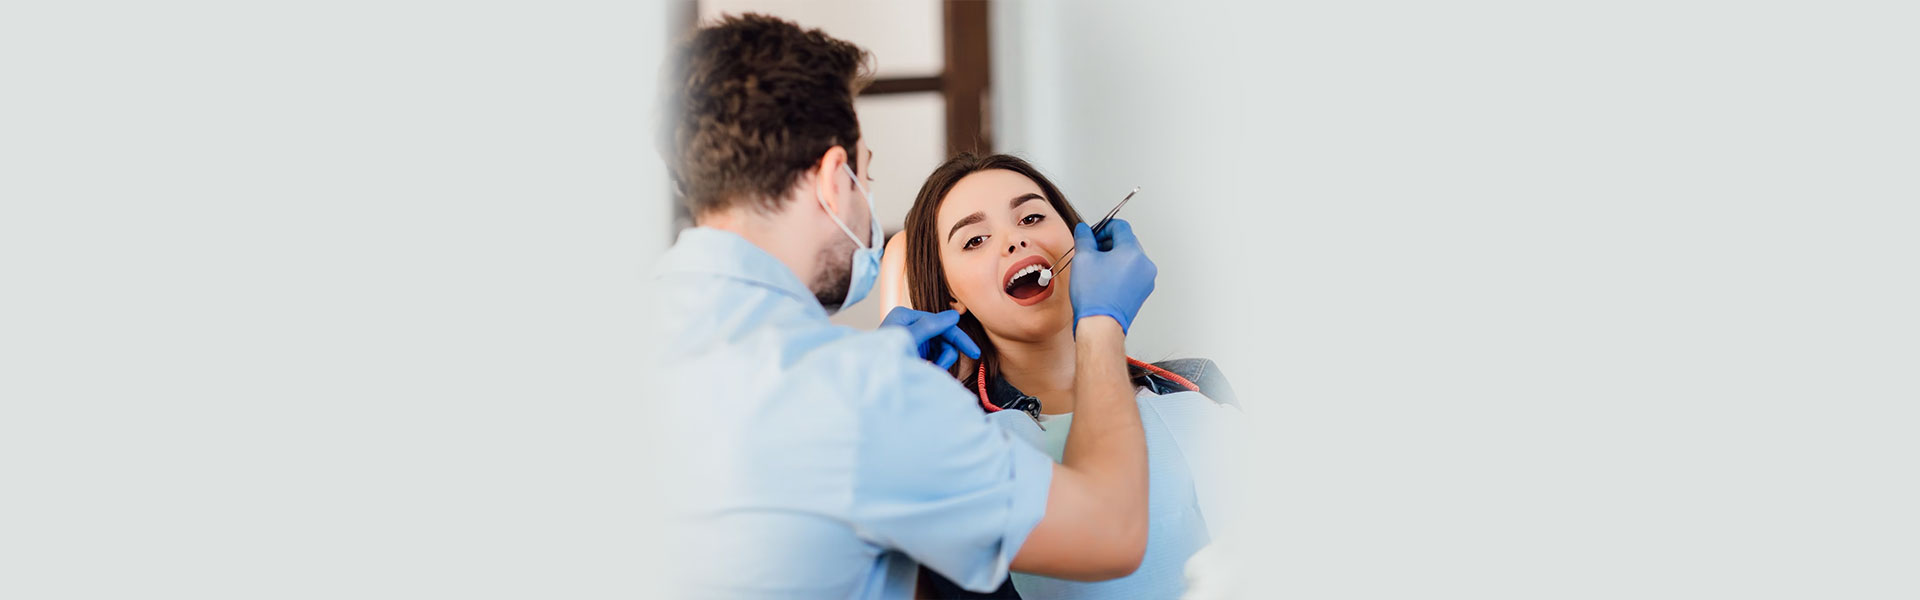 6 Times When You’ll Need Emergency Dental Care